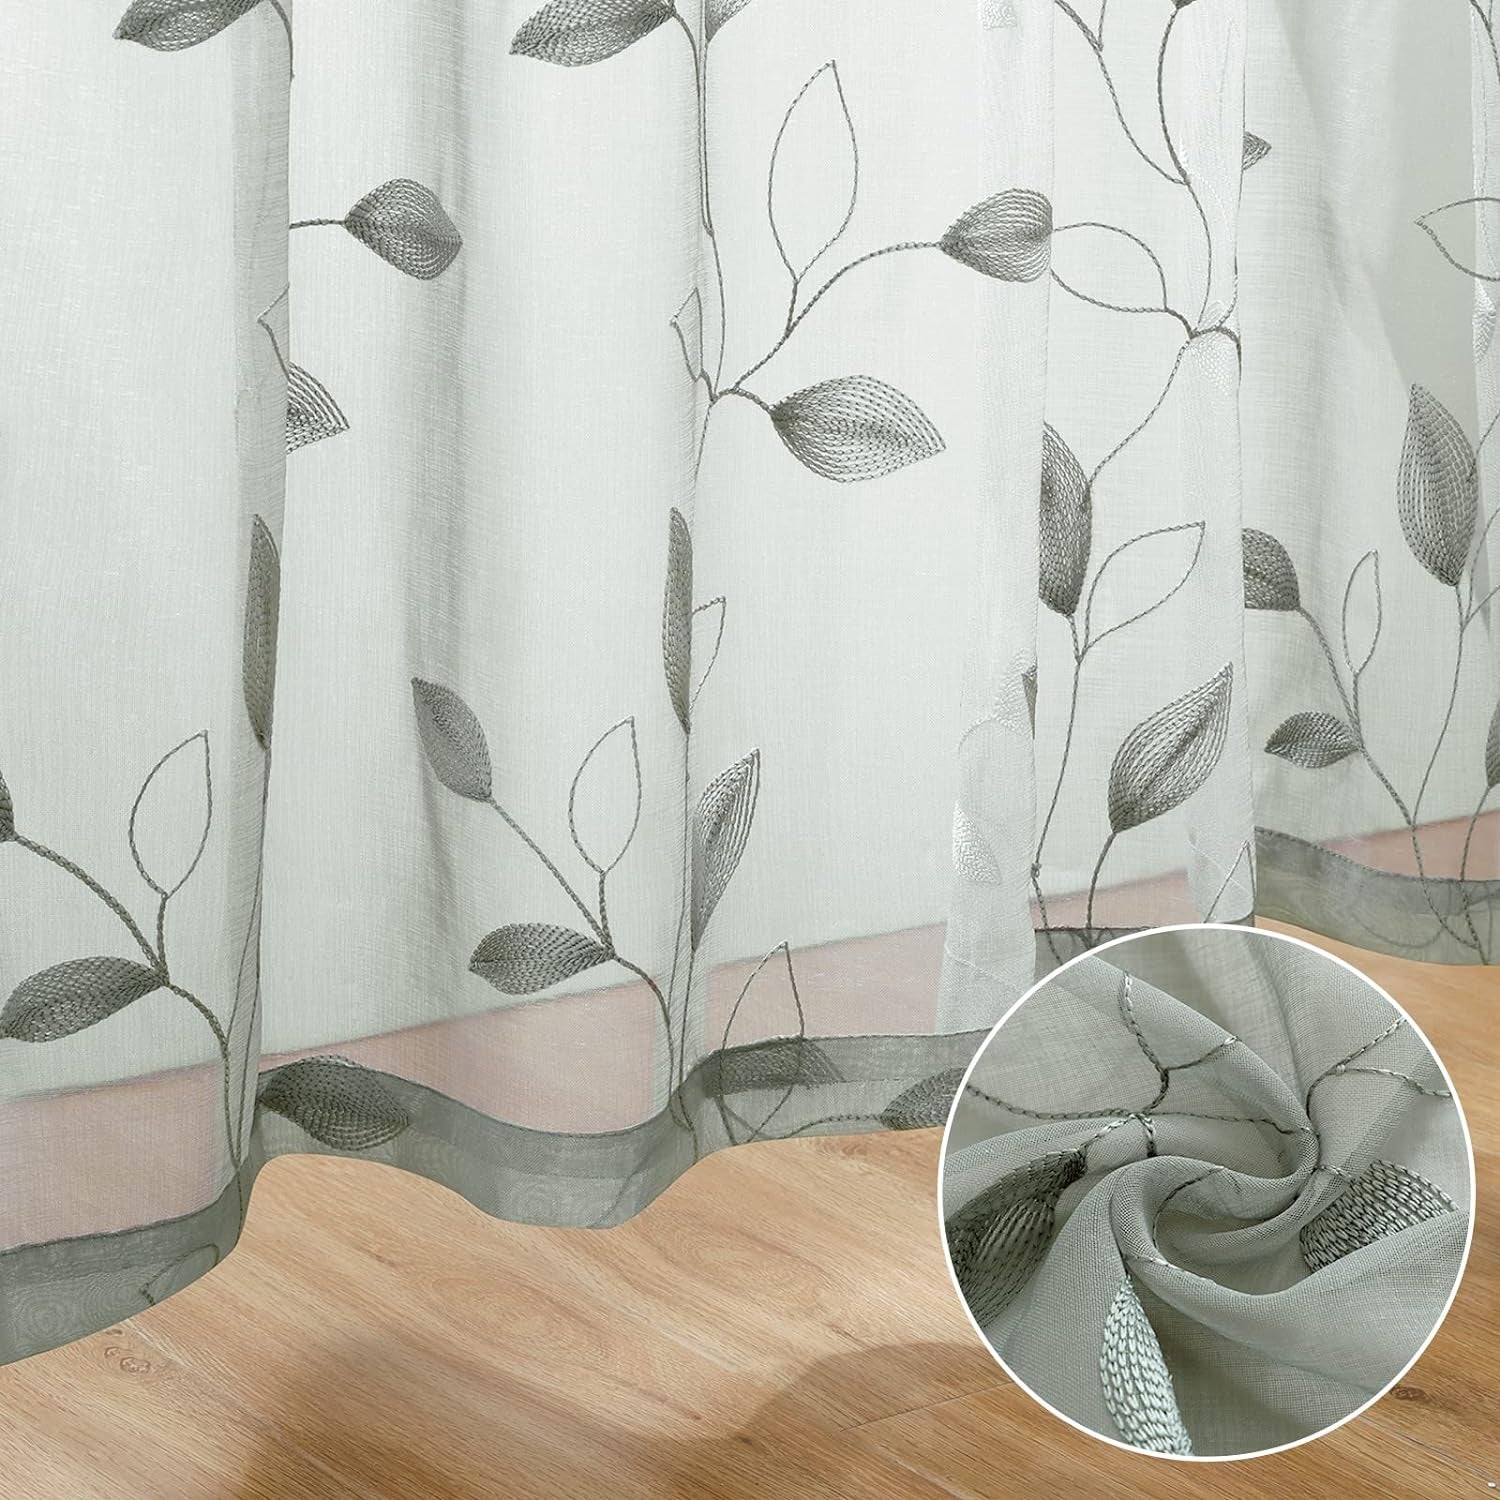 HOMEIDEAS Sage Green Sheer Curtains 52 X 63 Inches Length 2 Panels Embroidered Leaf Pattern Pocket Faux Linen Floral Semi Sheer Voile Window Curtains/Drapes for Bedroom Living Room  HOMEIDEAS   